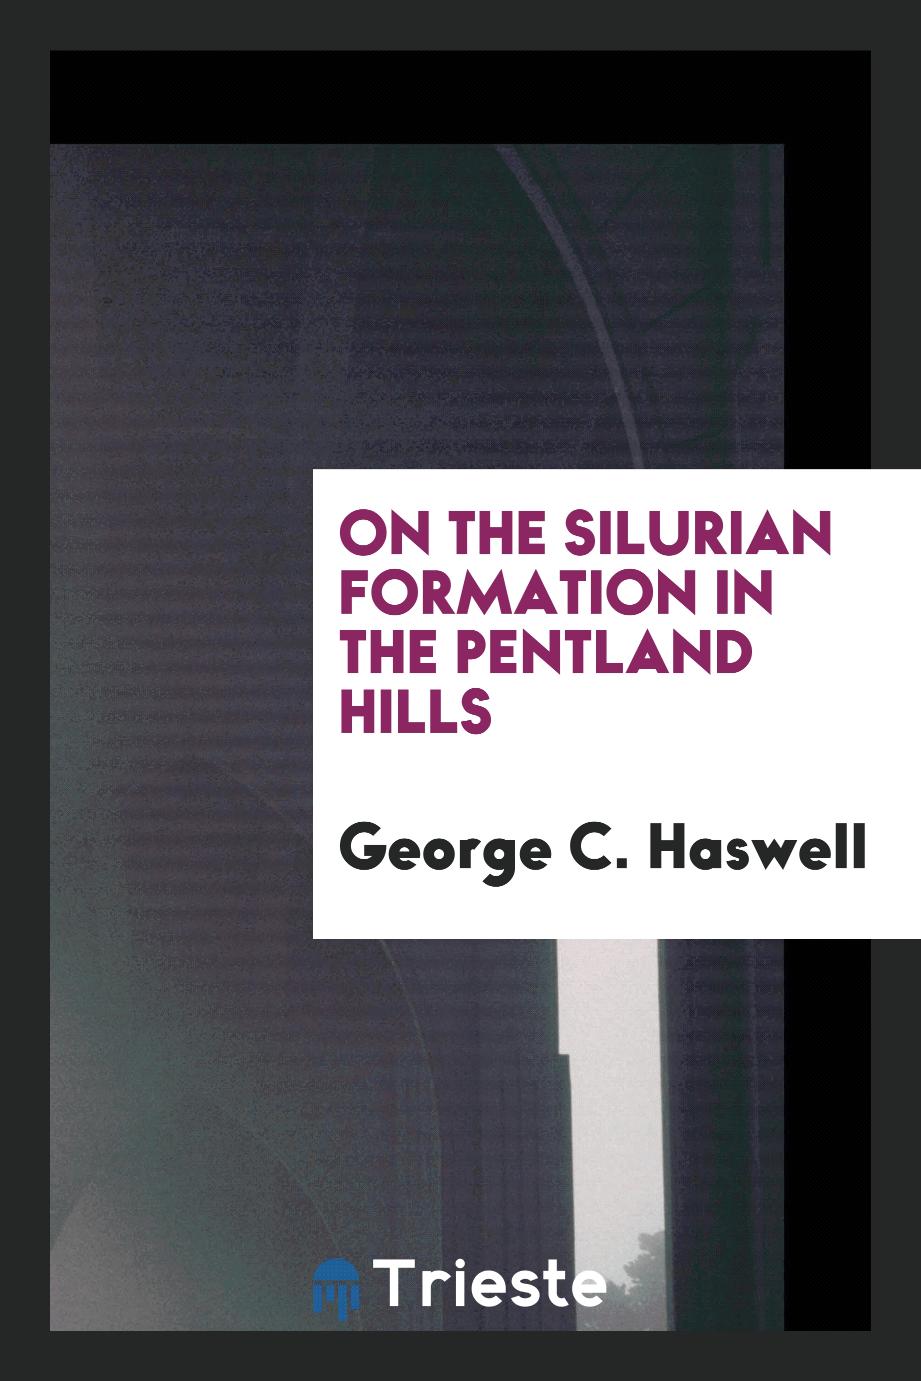 On the Silurian formation in the Pentland hills